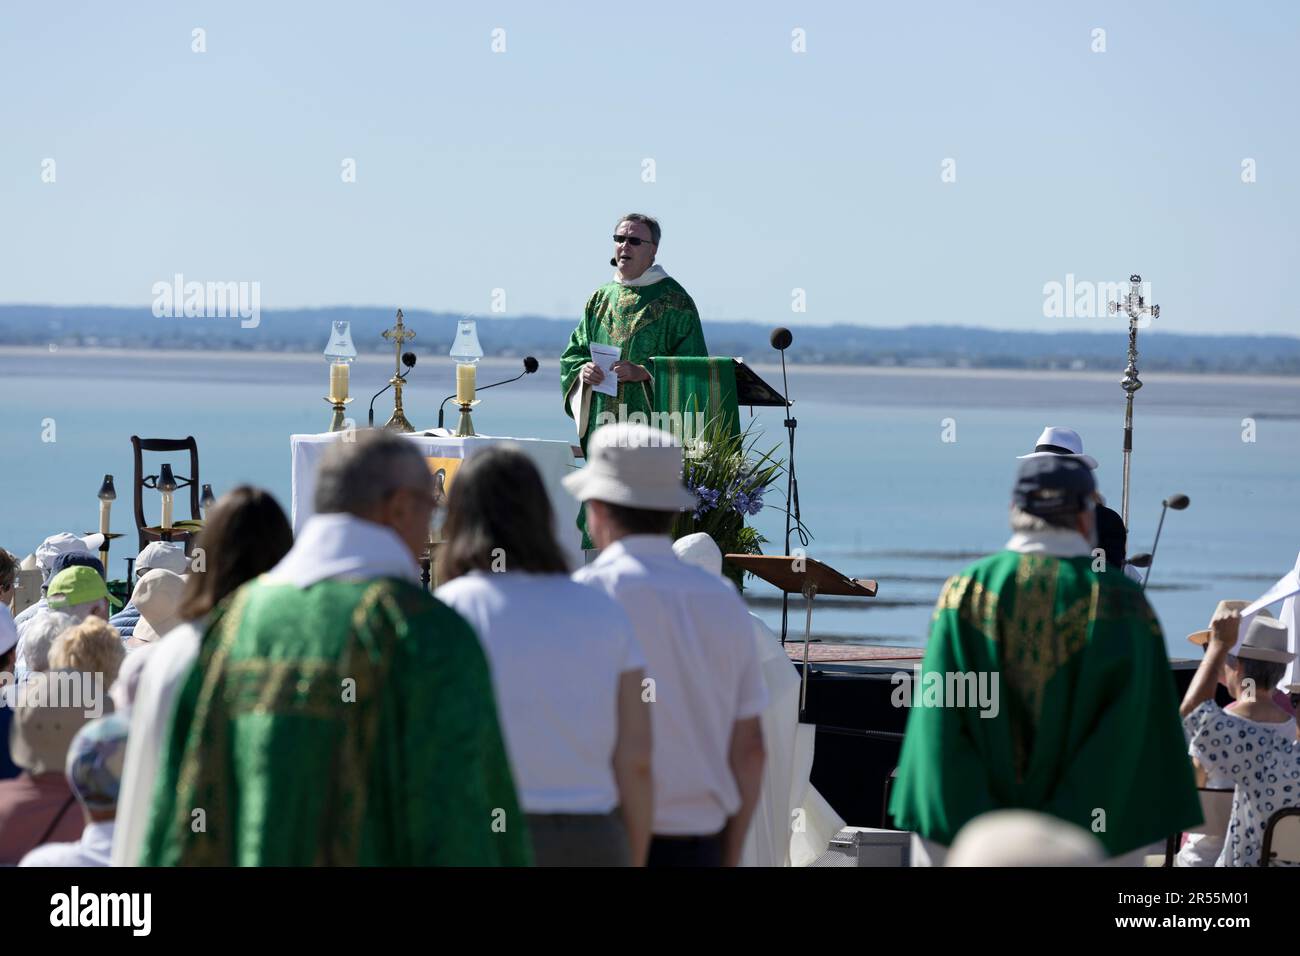 Recording of the TV program 'Le jour du Seigneur' (The Day of the Lord) in Cancale (Brittany, north-western France) on July 10, 2022 Stock Photo